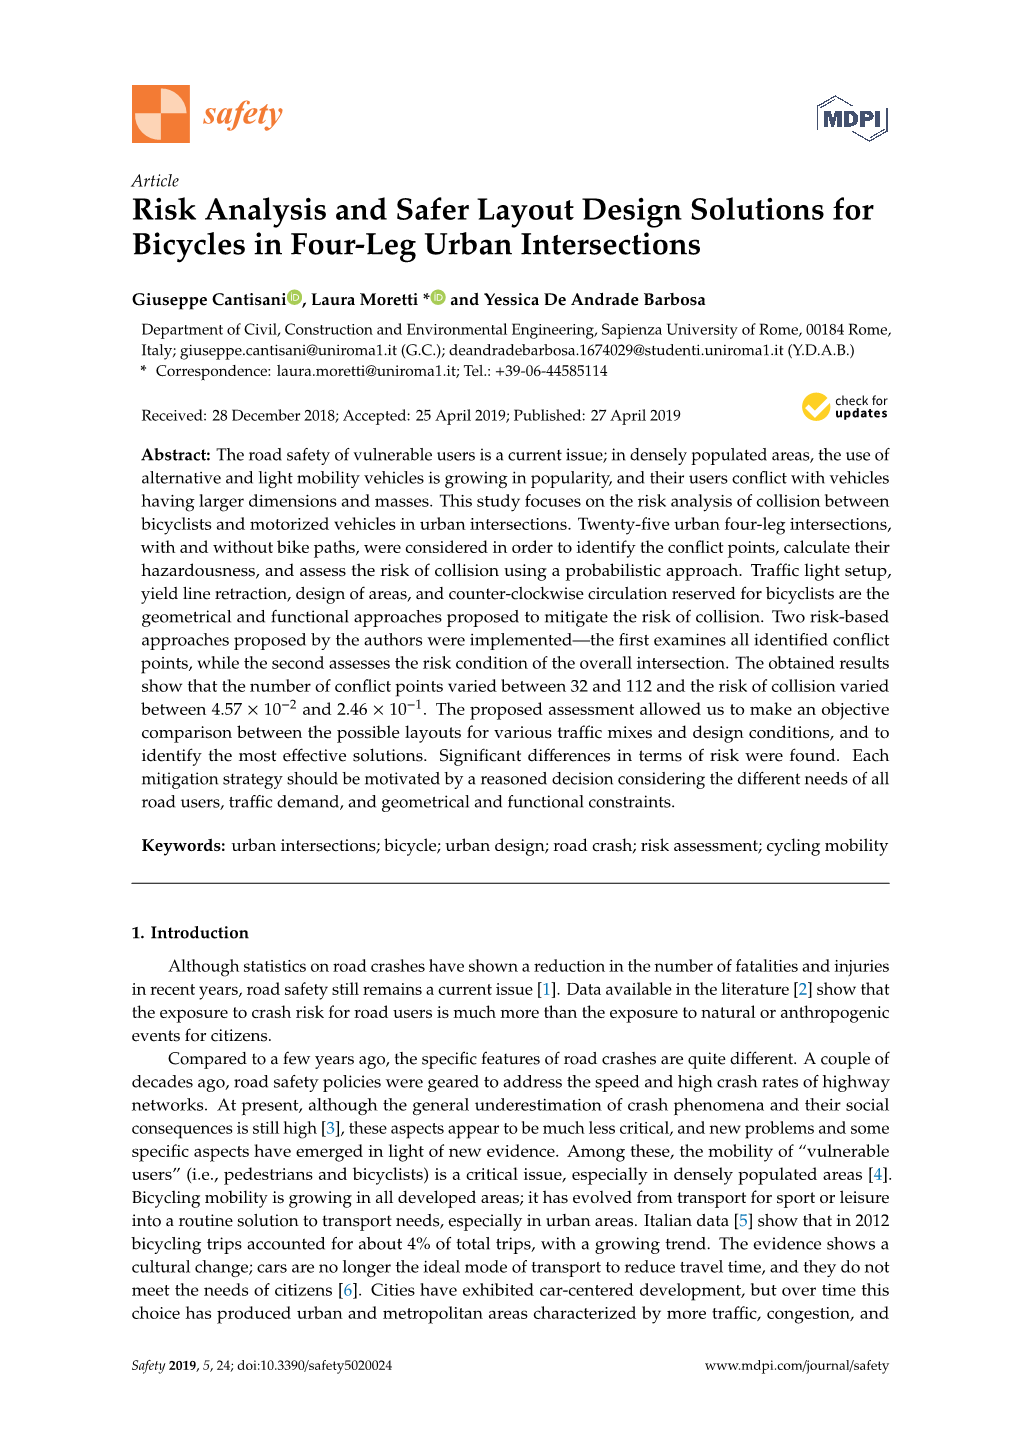 Risk Analysis and Safer Layout Design Solutions for Bicycles in Four-Leg Urban Intersections